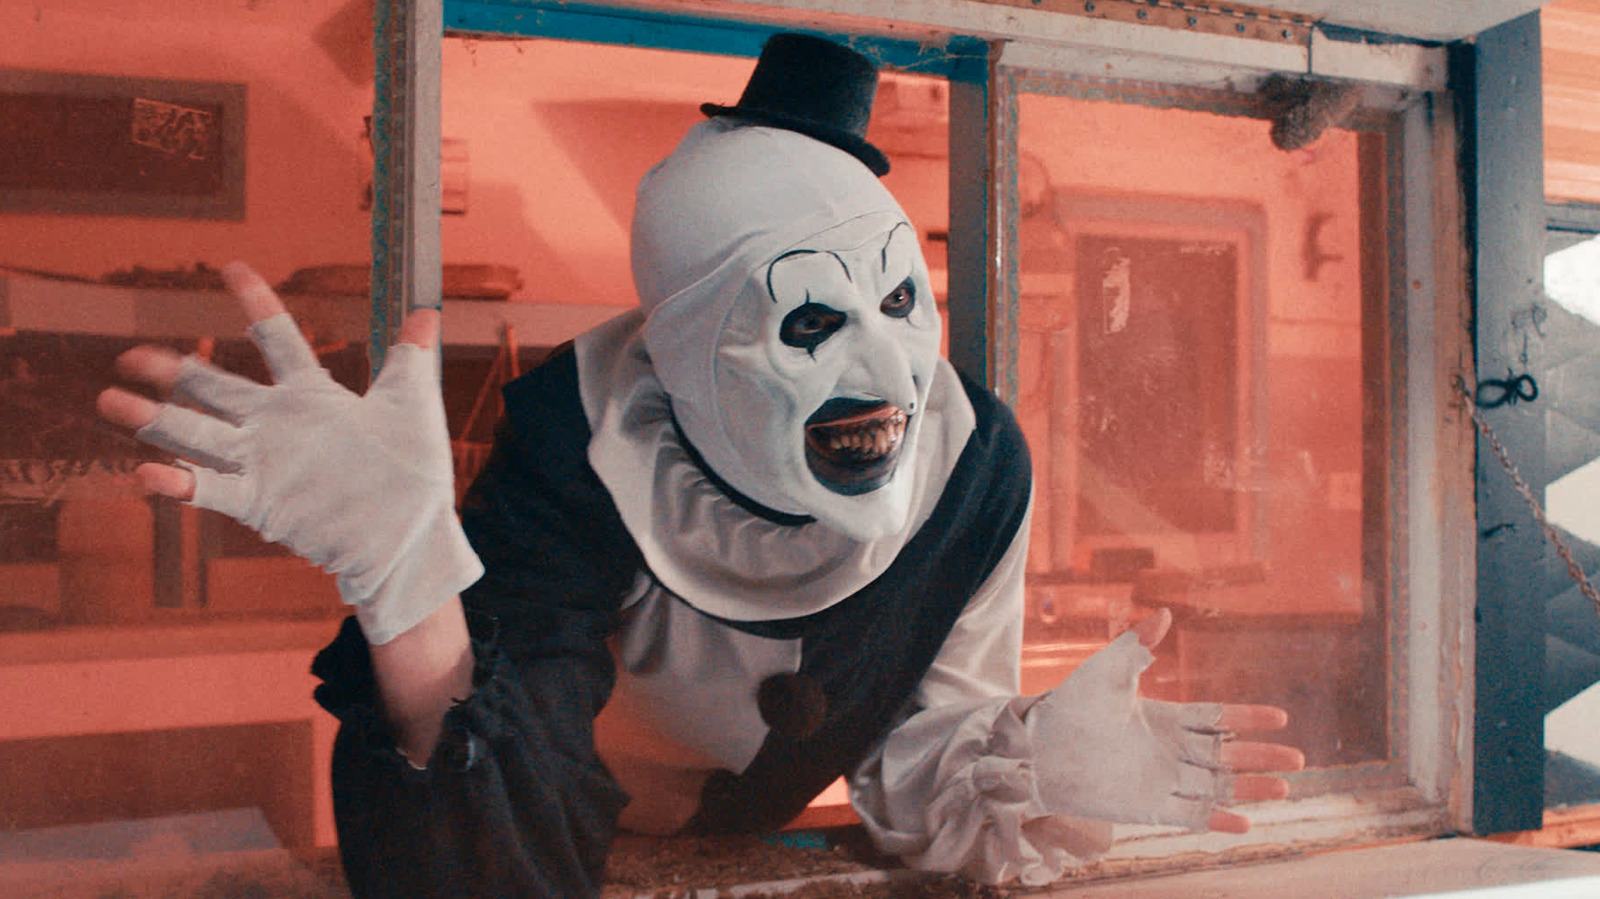 Terrifier 2 Isn't Out Yet, But Terrifier 3 Is All But Guaranteed